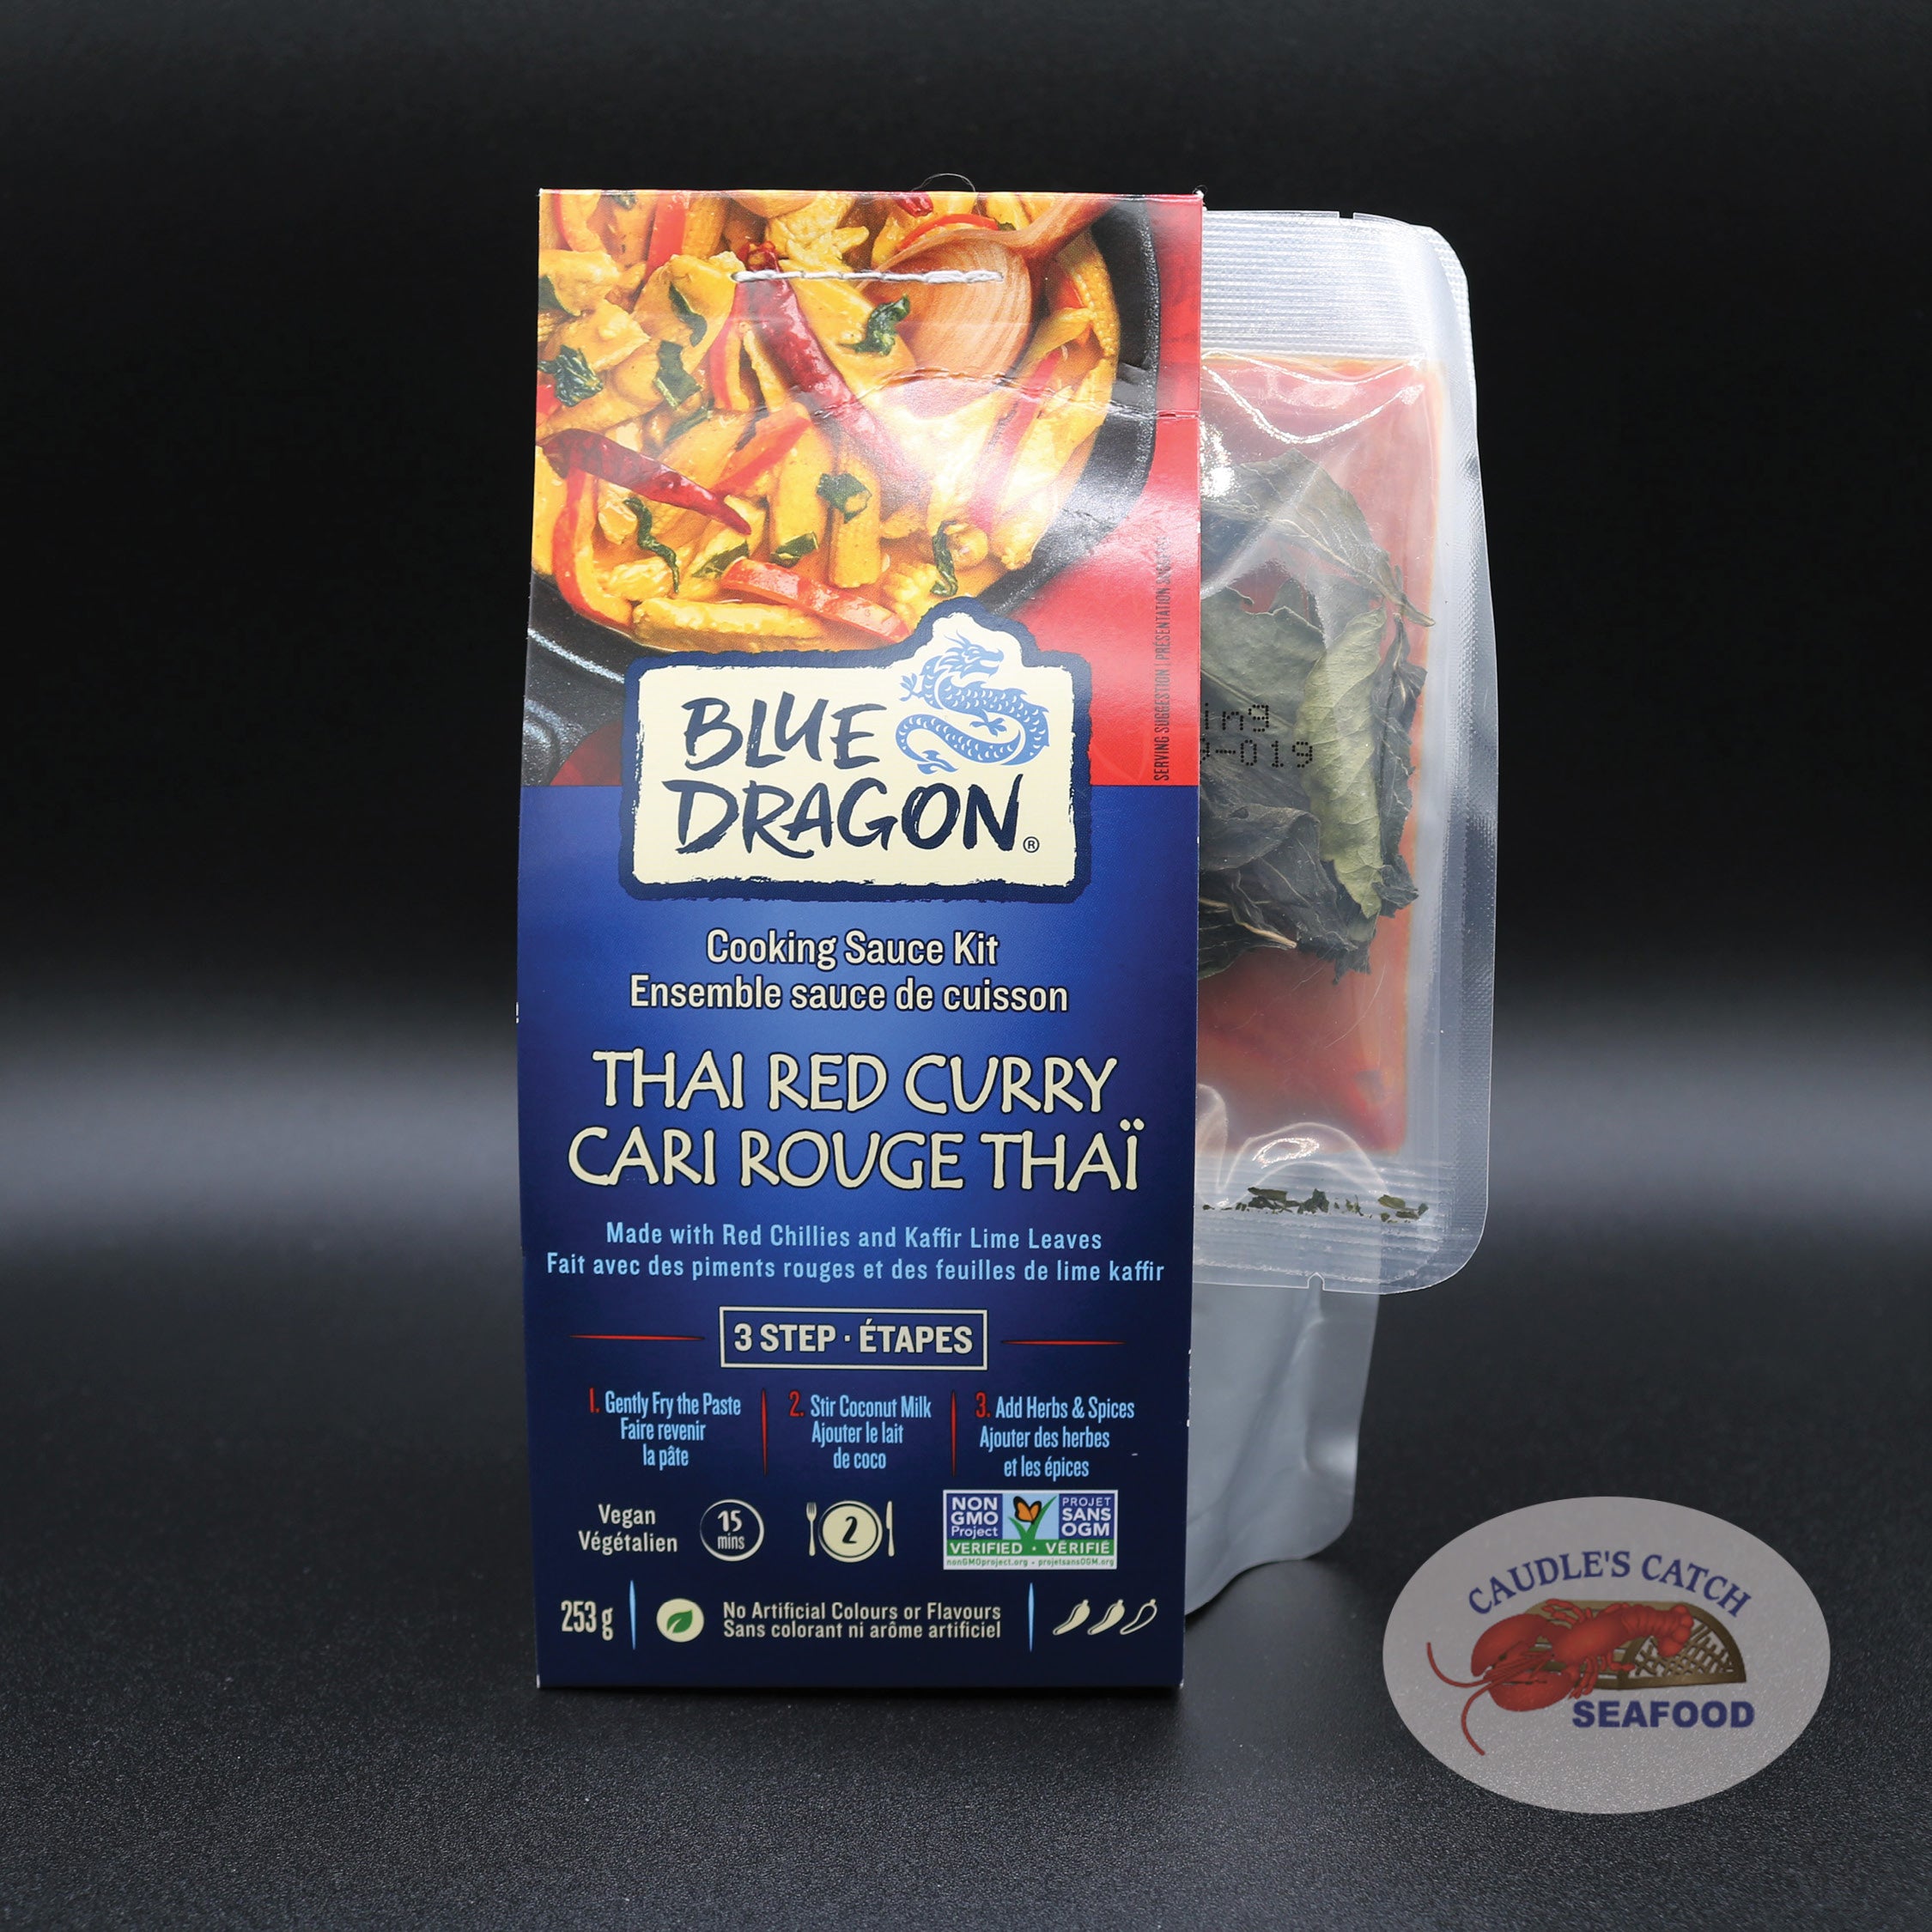 Aftale hver delvist Blue Dragon Thai Red Curry Cooking Sauce Kit | Caudle's Catch Seafood